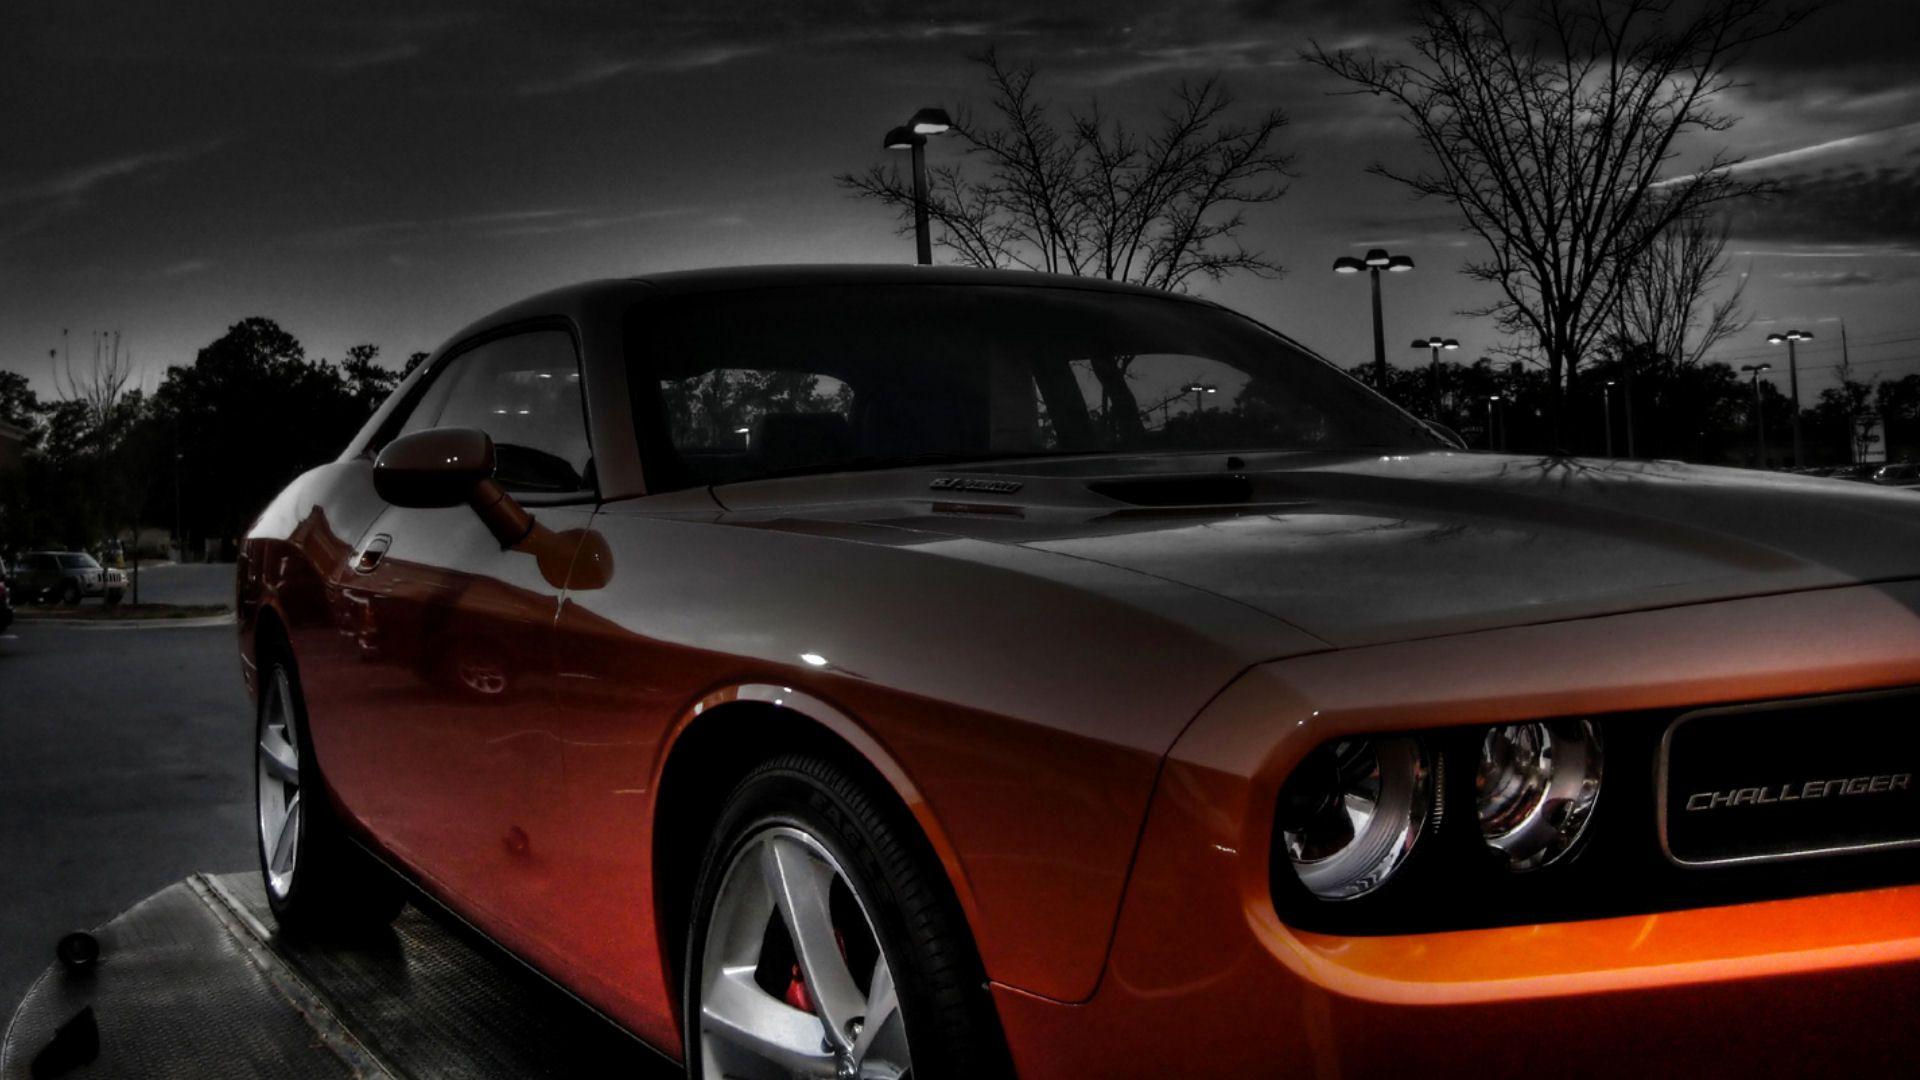 Free Muscle Car Wallpaper Fresh High Definition American Muscle Cars